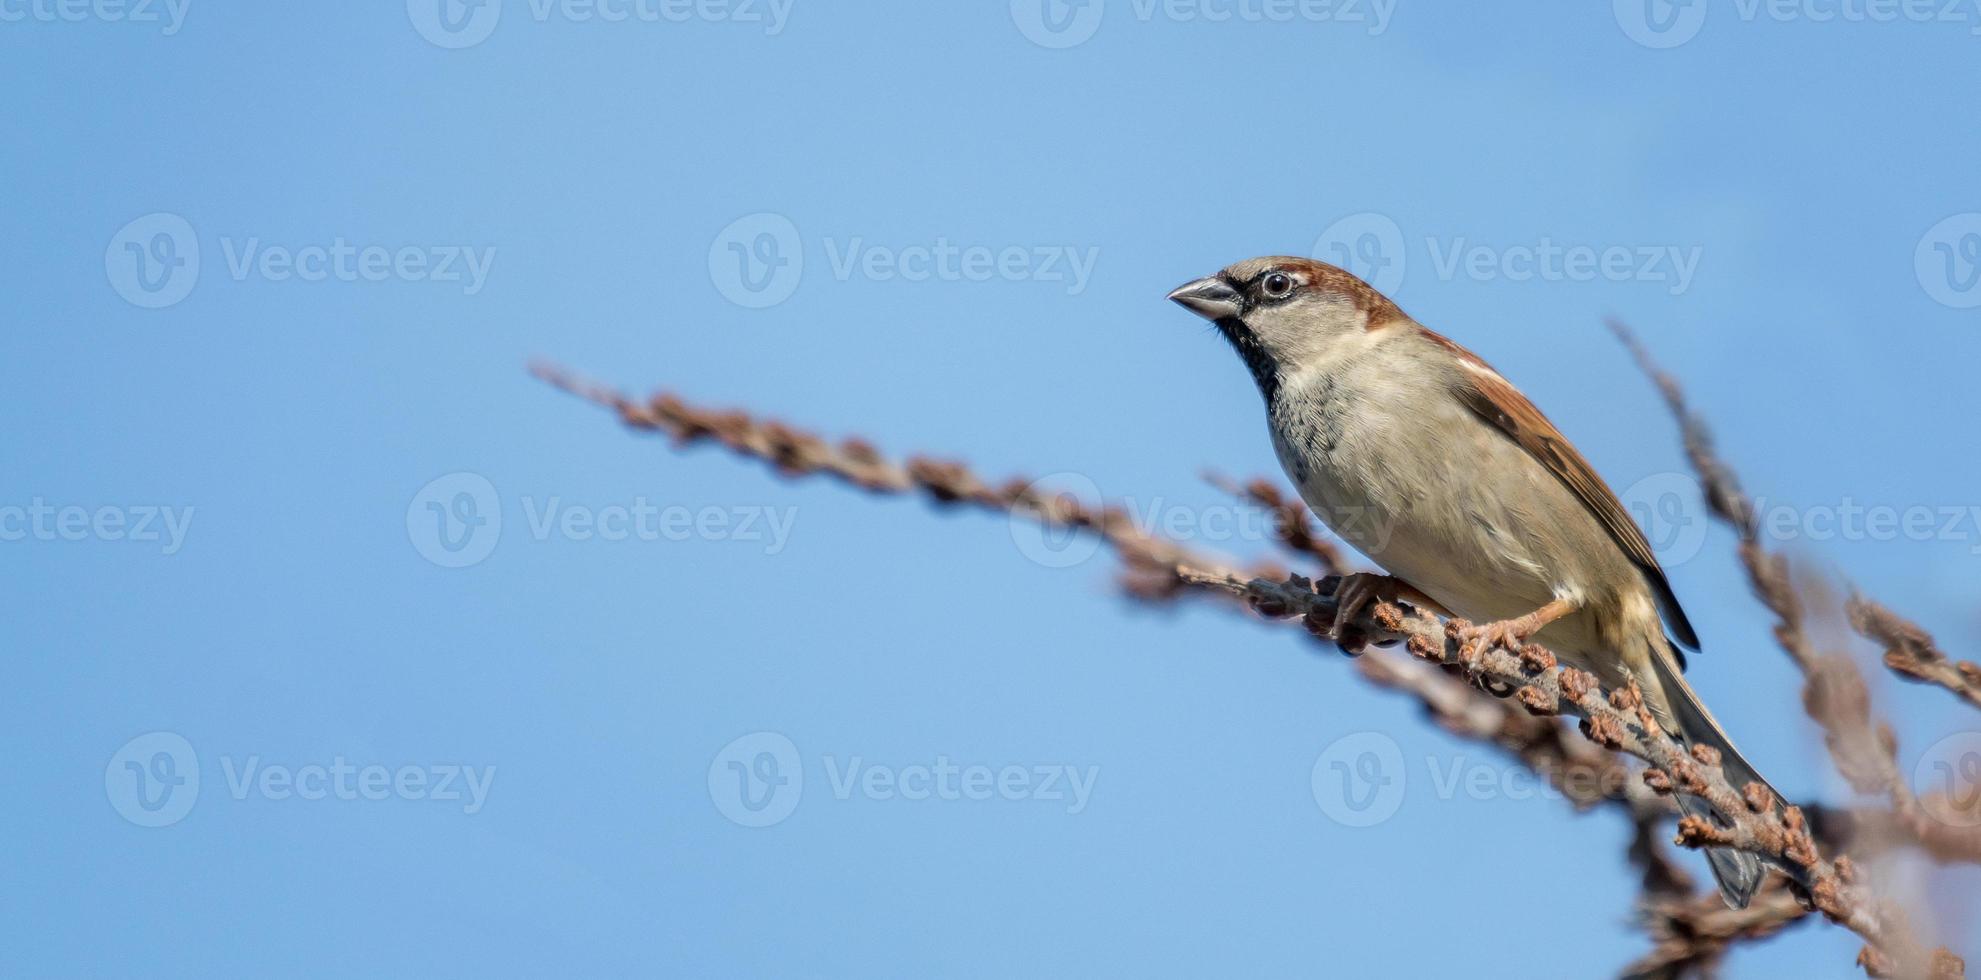 little sparrow male is looking interested sitting on a branch in front of blue sky photo